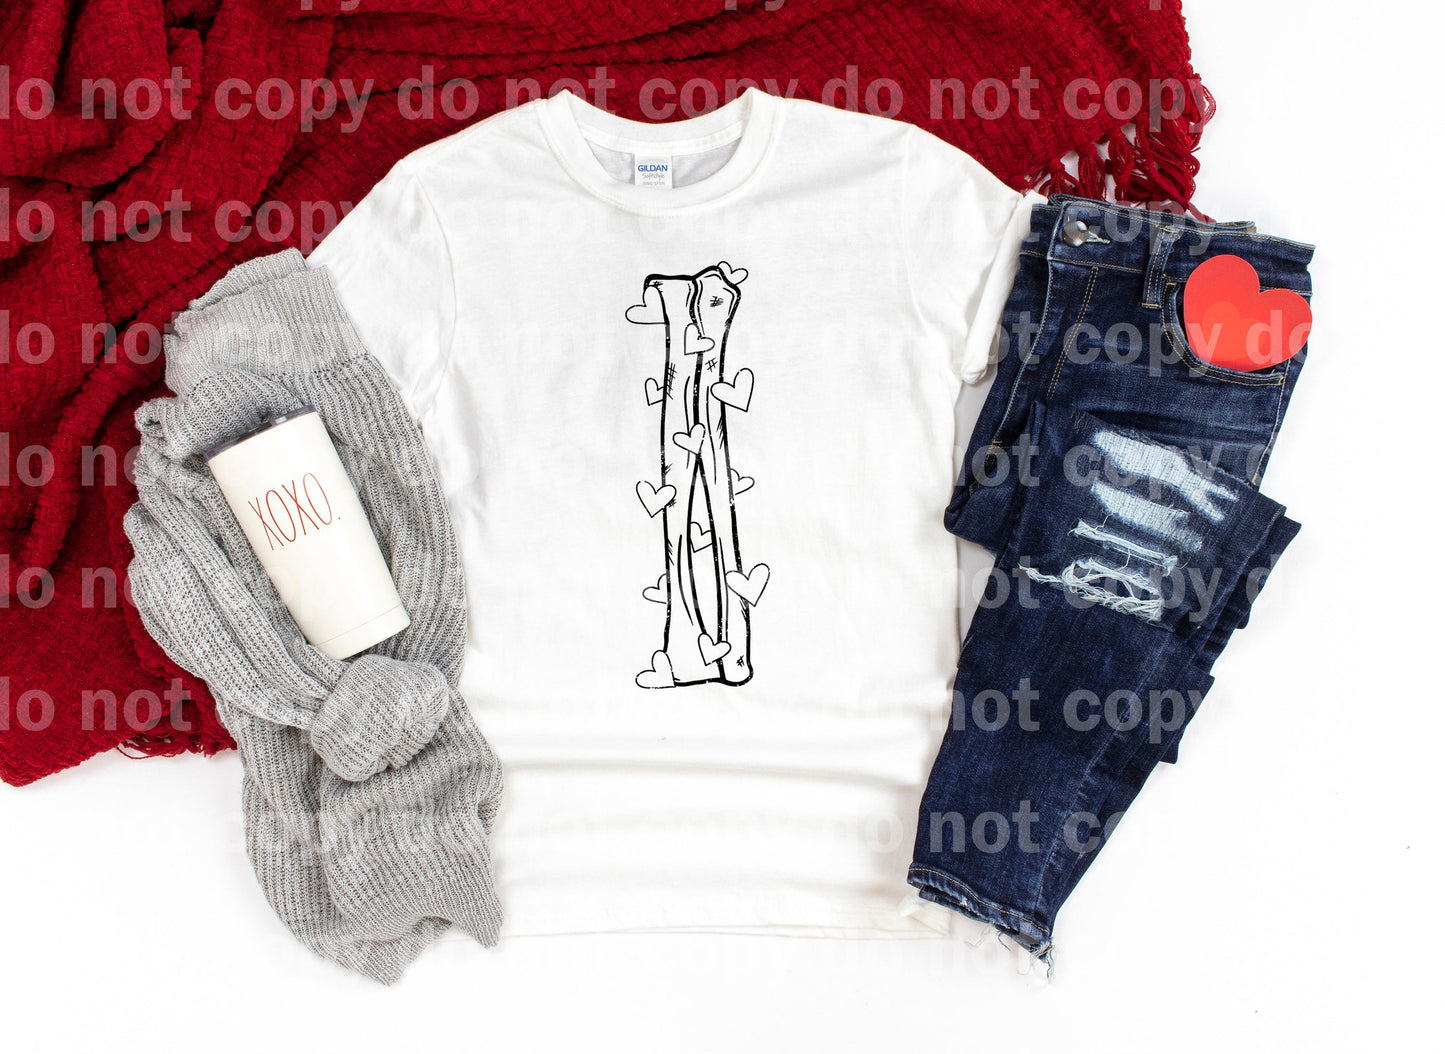 Heart Arm Bones Distressed Full Color/One Color with Pocket Option Dream Print or Sublimation Print